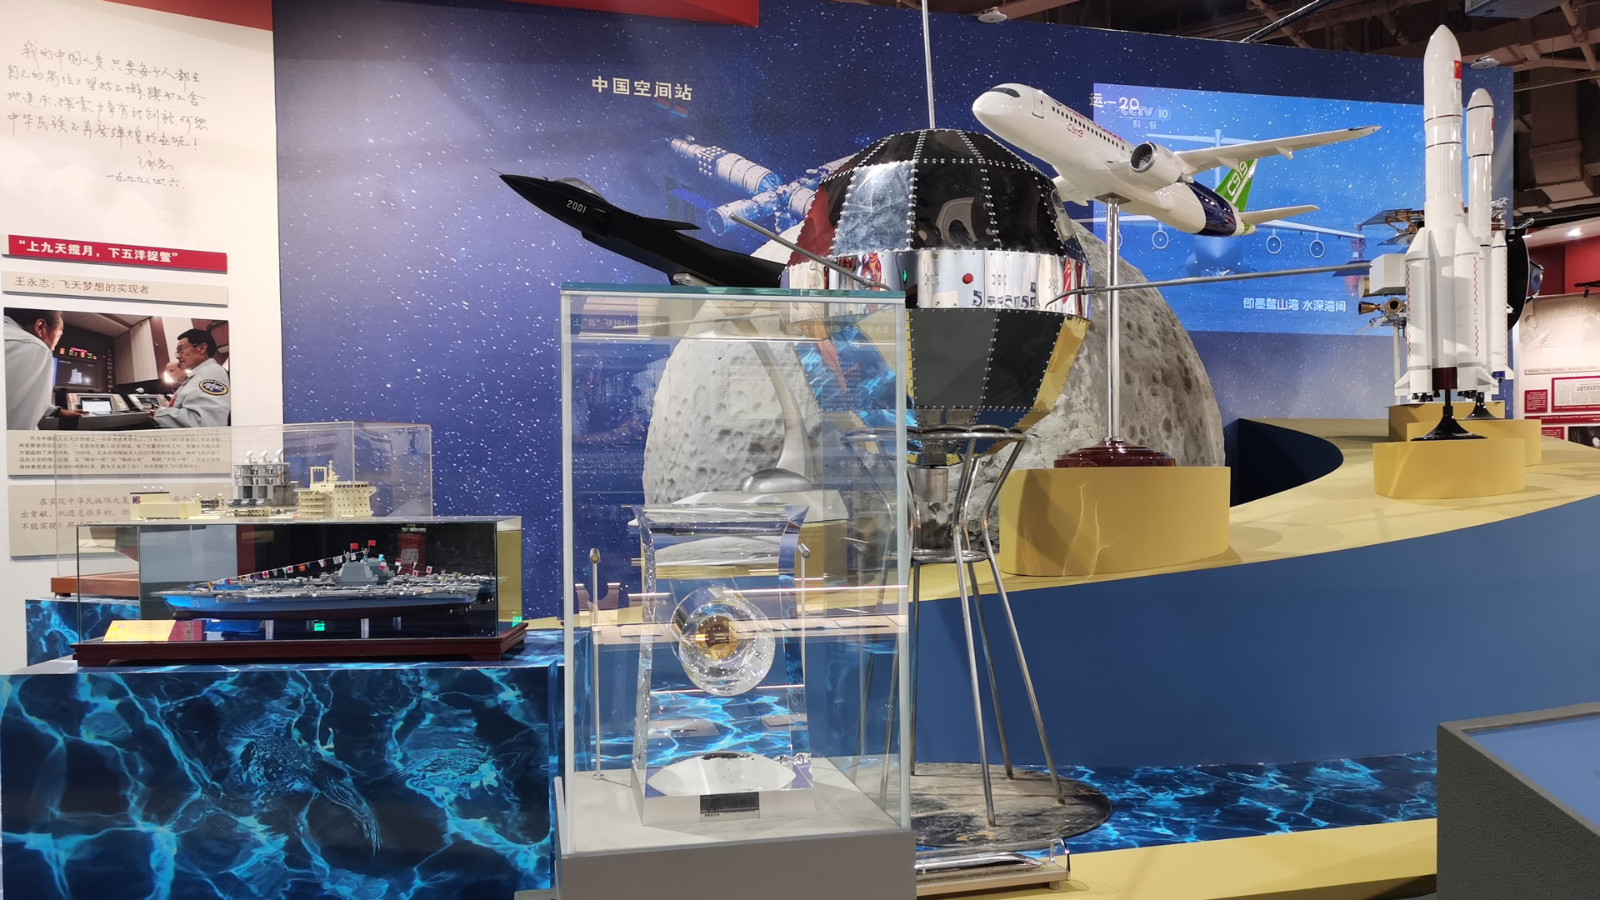 Models of China's sci-tech achievements are displayed in the National Museum for Modern Chinese Scientists, Beijing, May 30, 2024. /CGTN